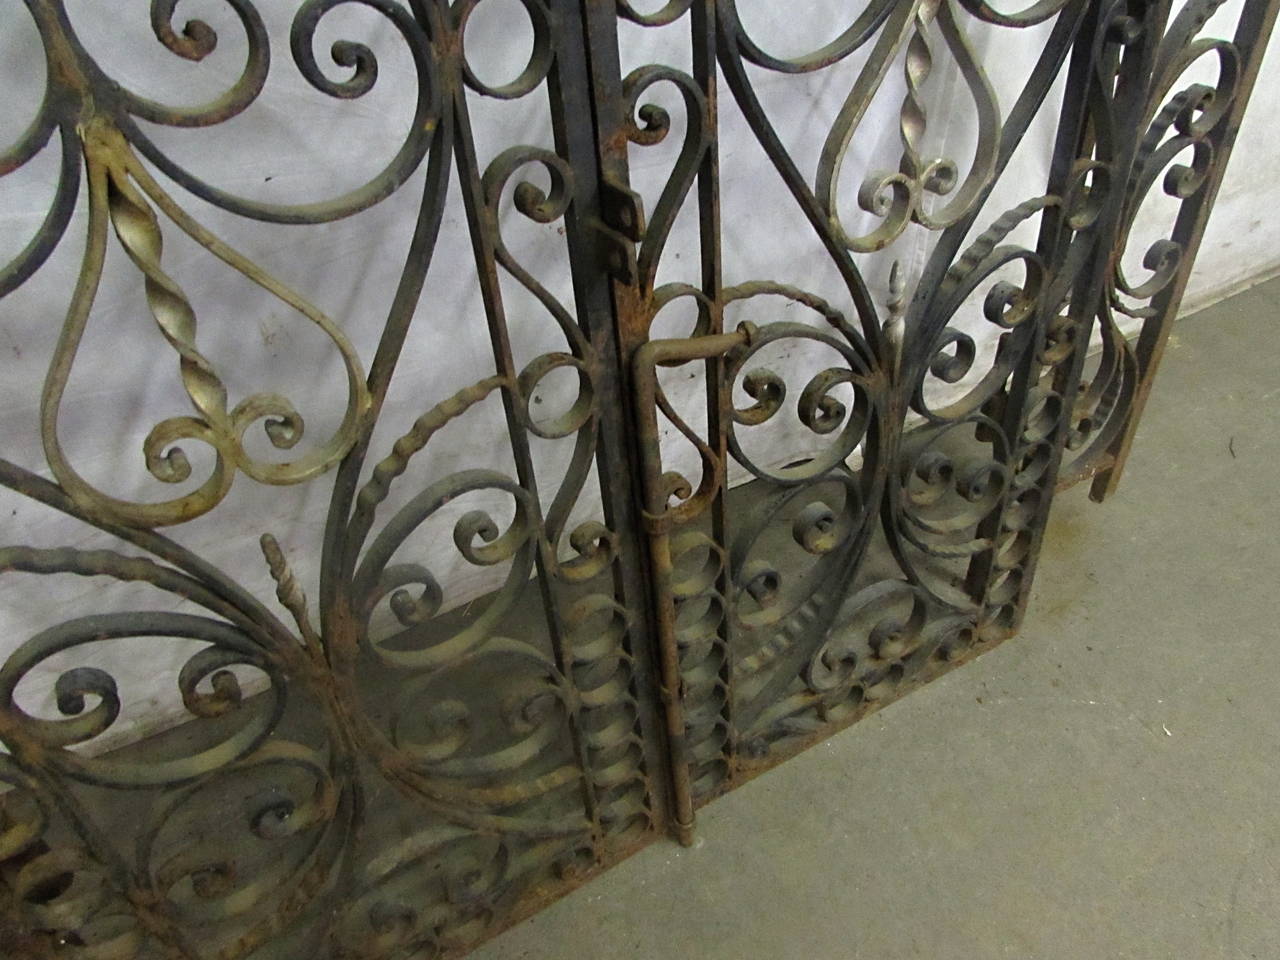 1950s Highly Ornate Wrought Iron Entry Gates with Surround 1